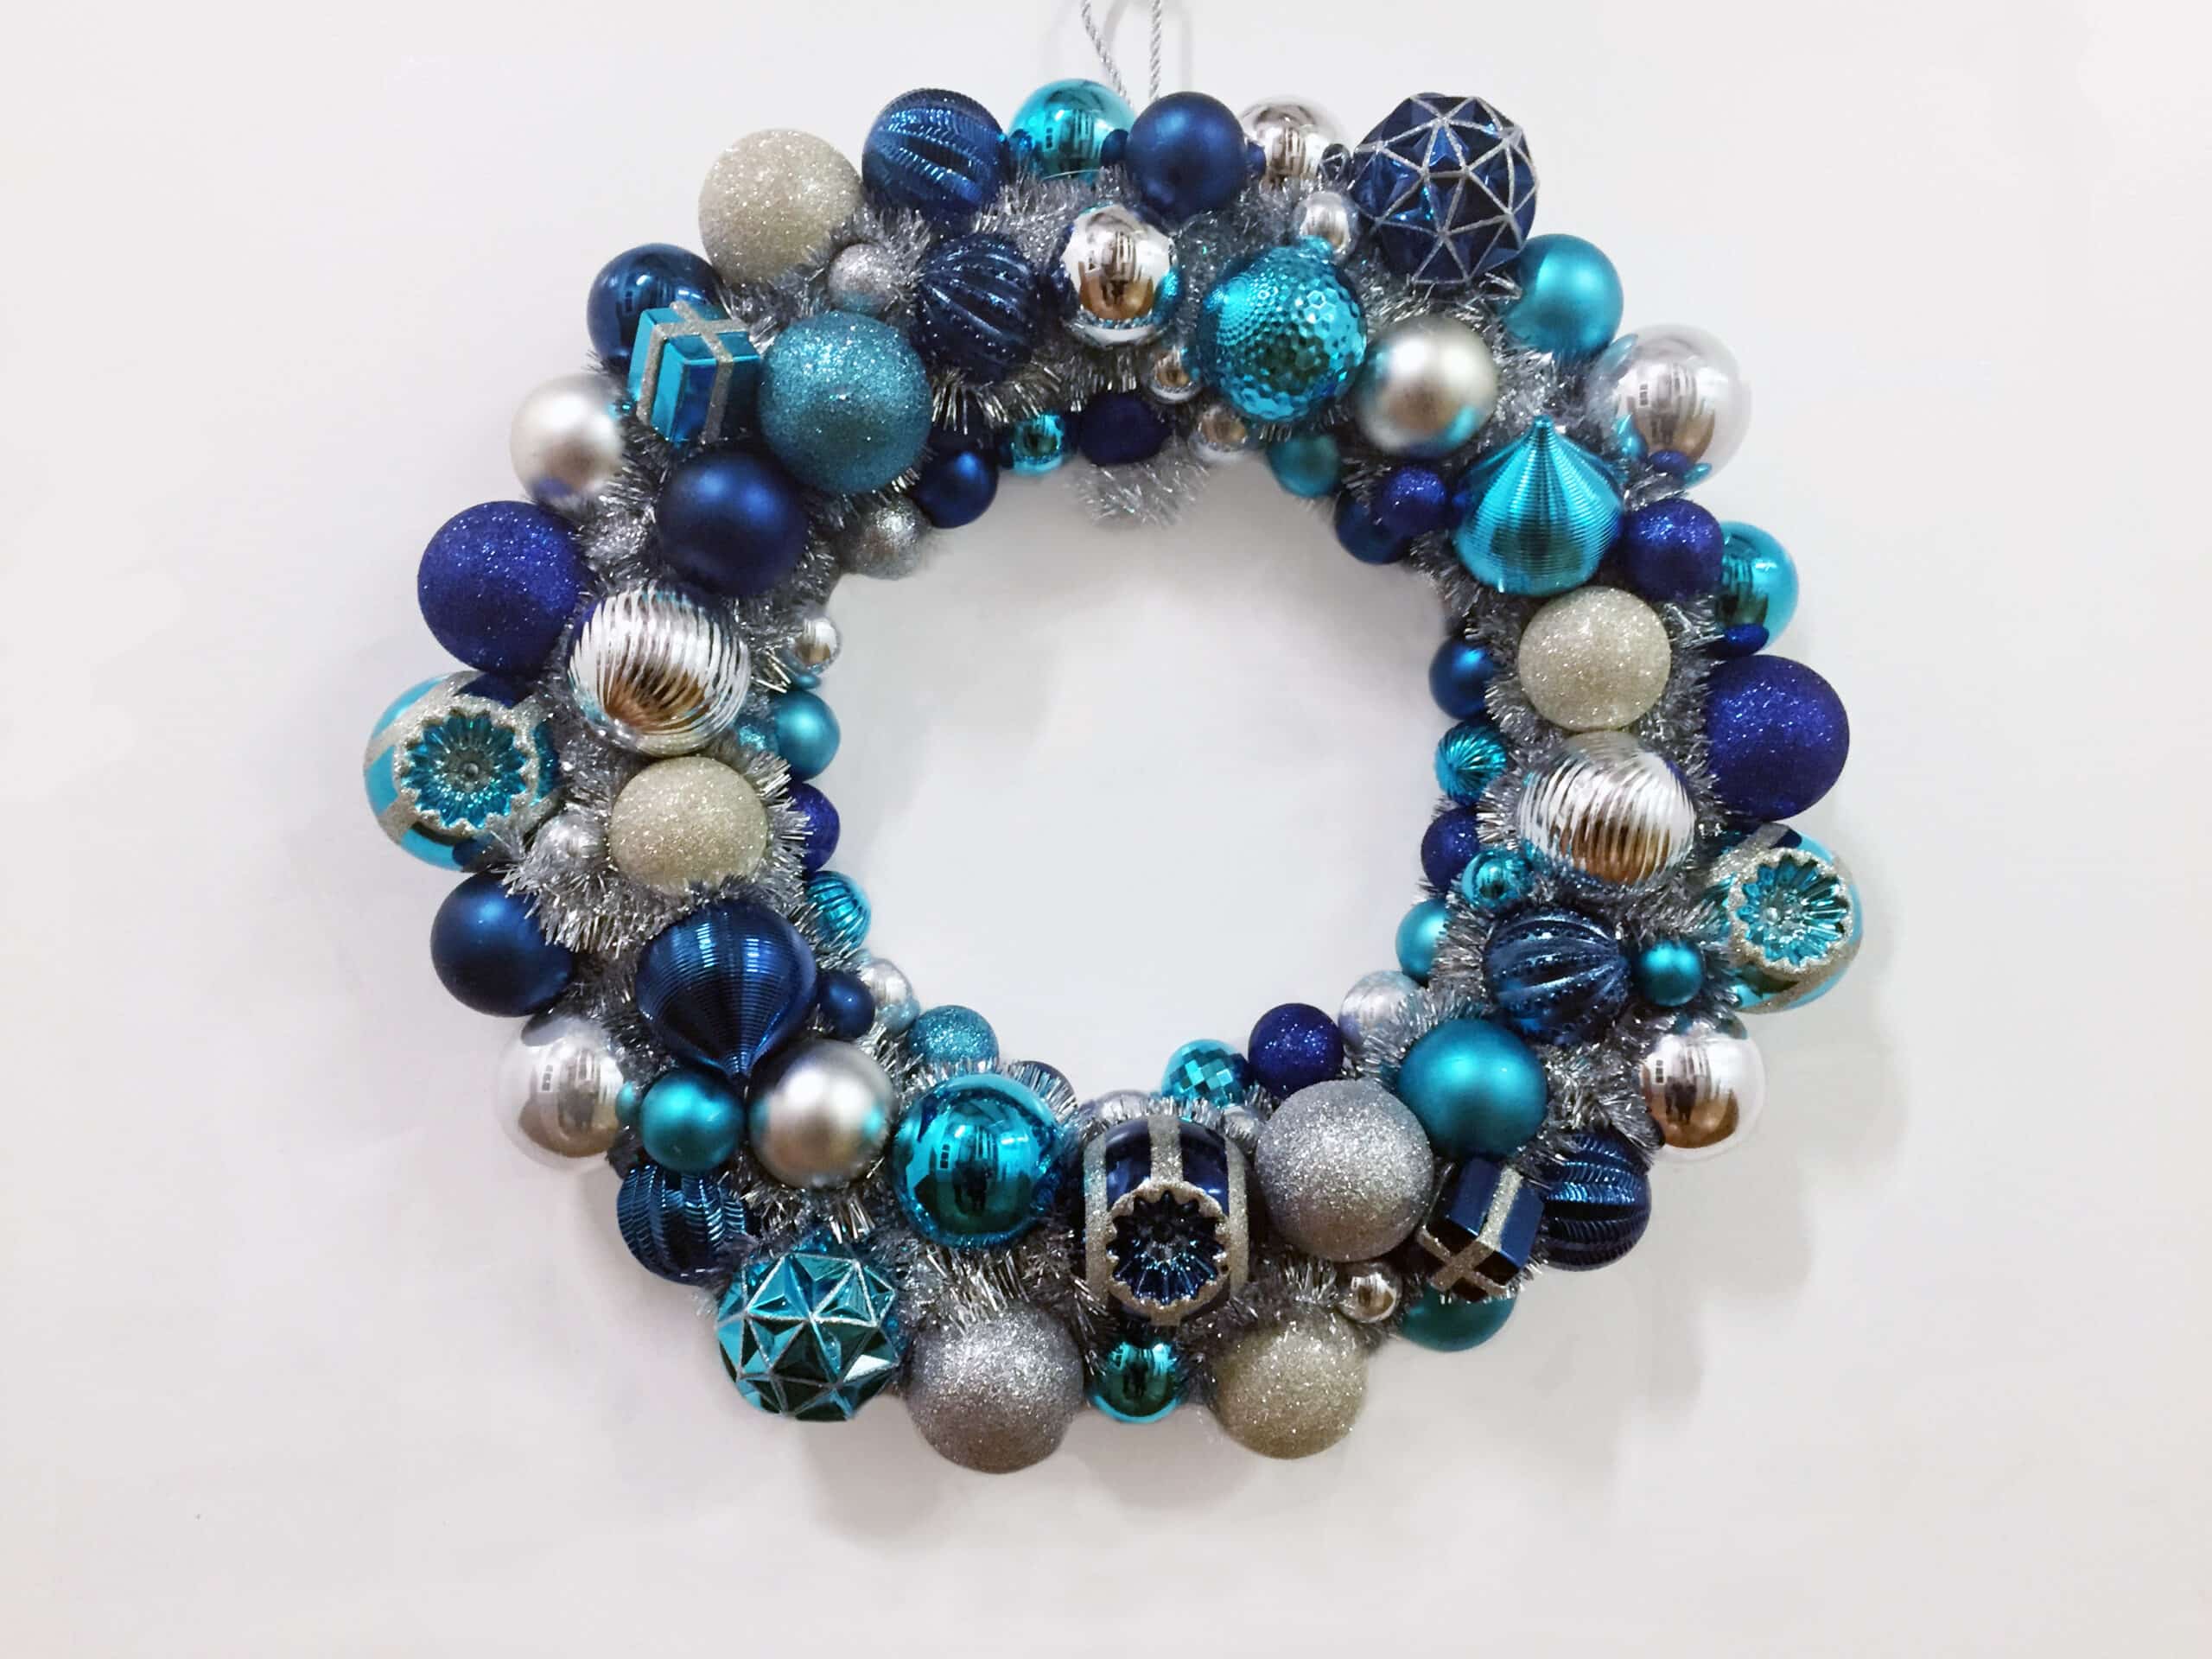 Beautiful blue wreath for Christmas decoration is made from blue and sliver balls and hung on a white wall.